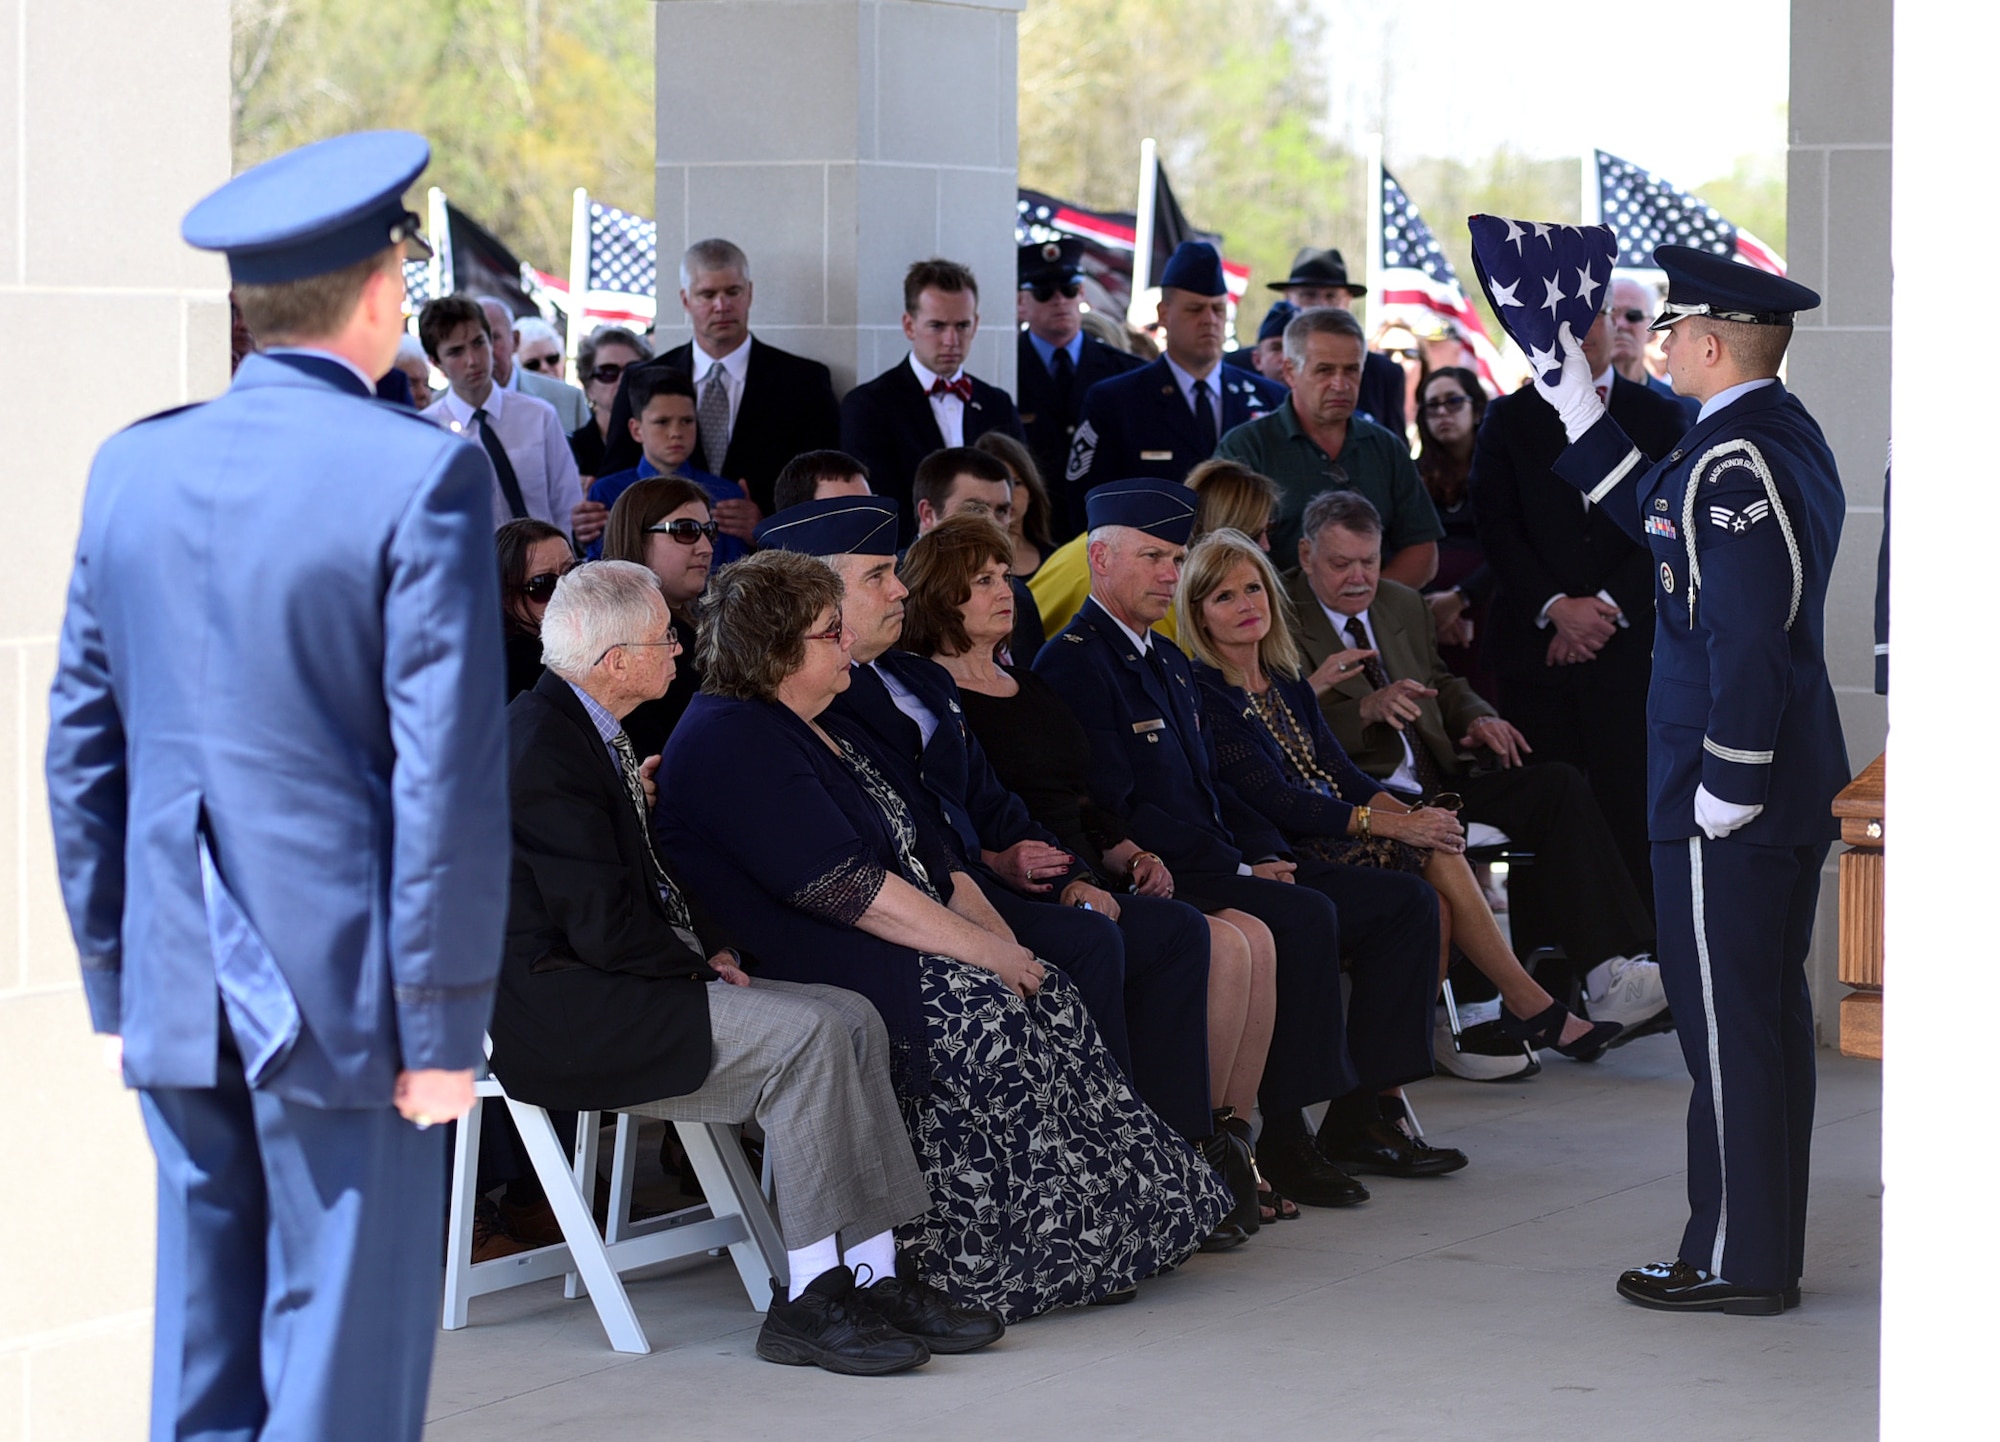 A Seymour Johnson Air Force Base Honor Guardsmen presents a flag in honor of Col. Edgar Davis during his funeral ceremony April 6, 2018, Goldsboro, North Carolina. Davis was shot down during a night photo-reconnaissance mission over Laos during the Vietnam War. After initial rescue efforts were unsuccessful, he was assumed dead and his remains stayed missing for 50 years. (U.S. Air Force photo by Senior Airman Christian Clausen)